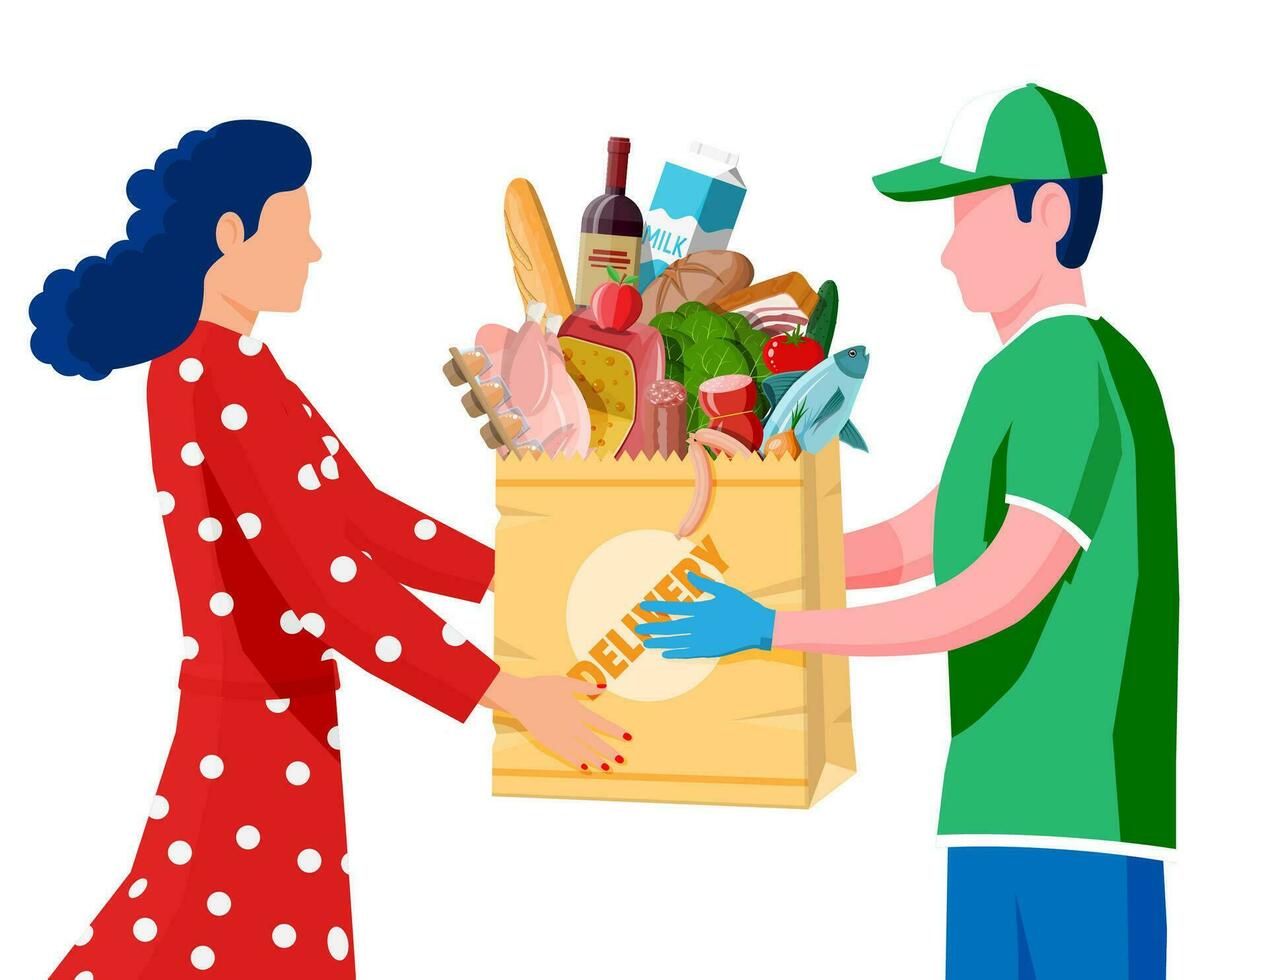 Courier delivered package of groceries to customer. Food delivery service concept. Delivery man give ordered products to woman. Online supermarket or internet shop. Flat vector illustration